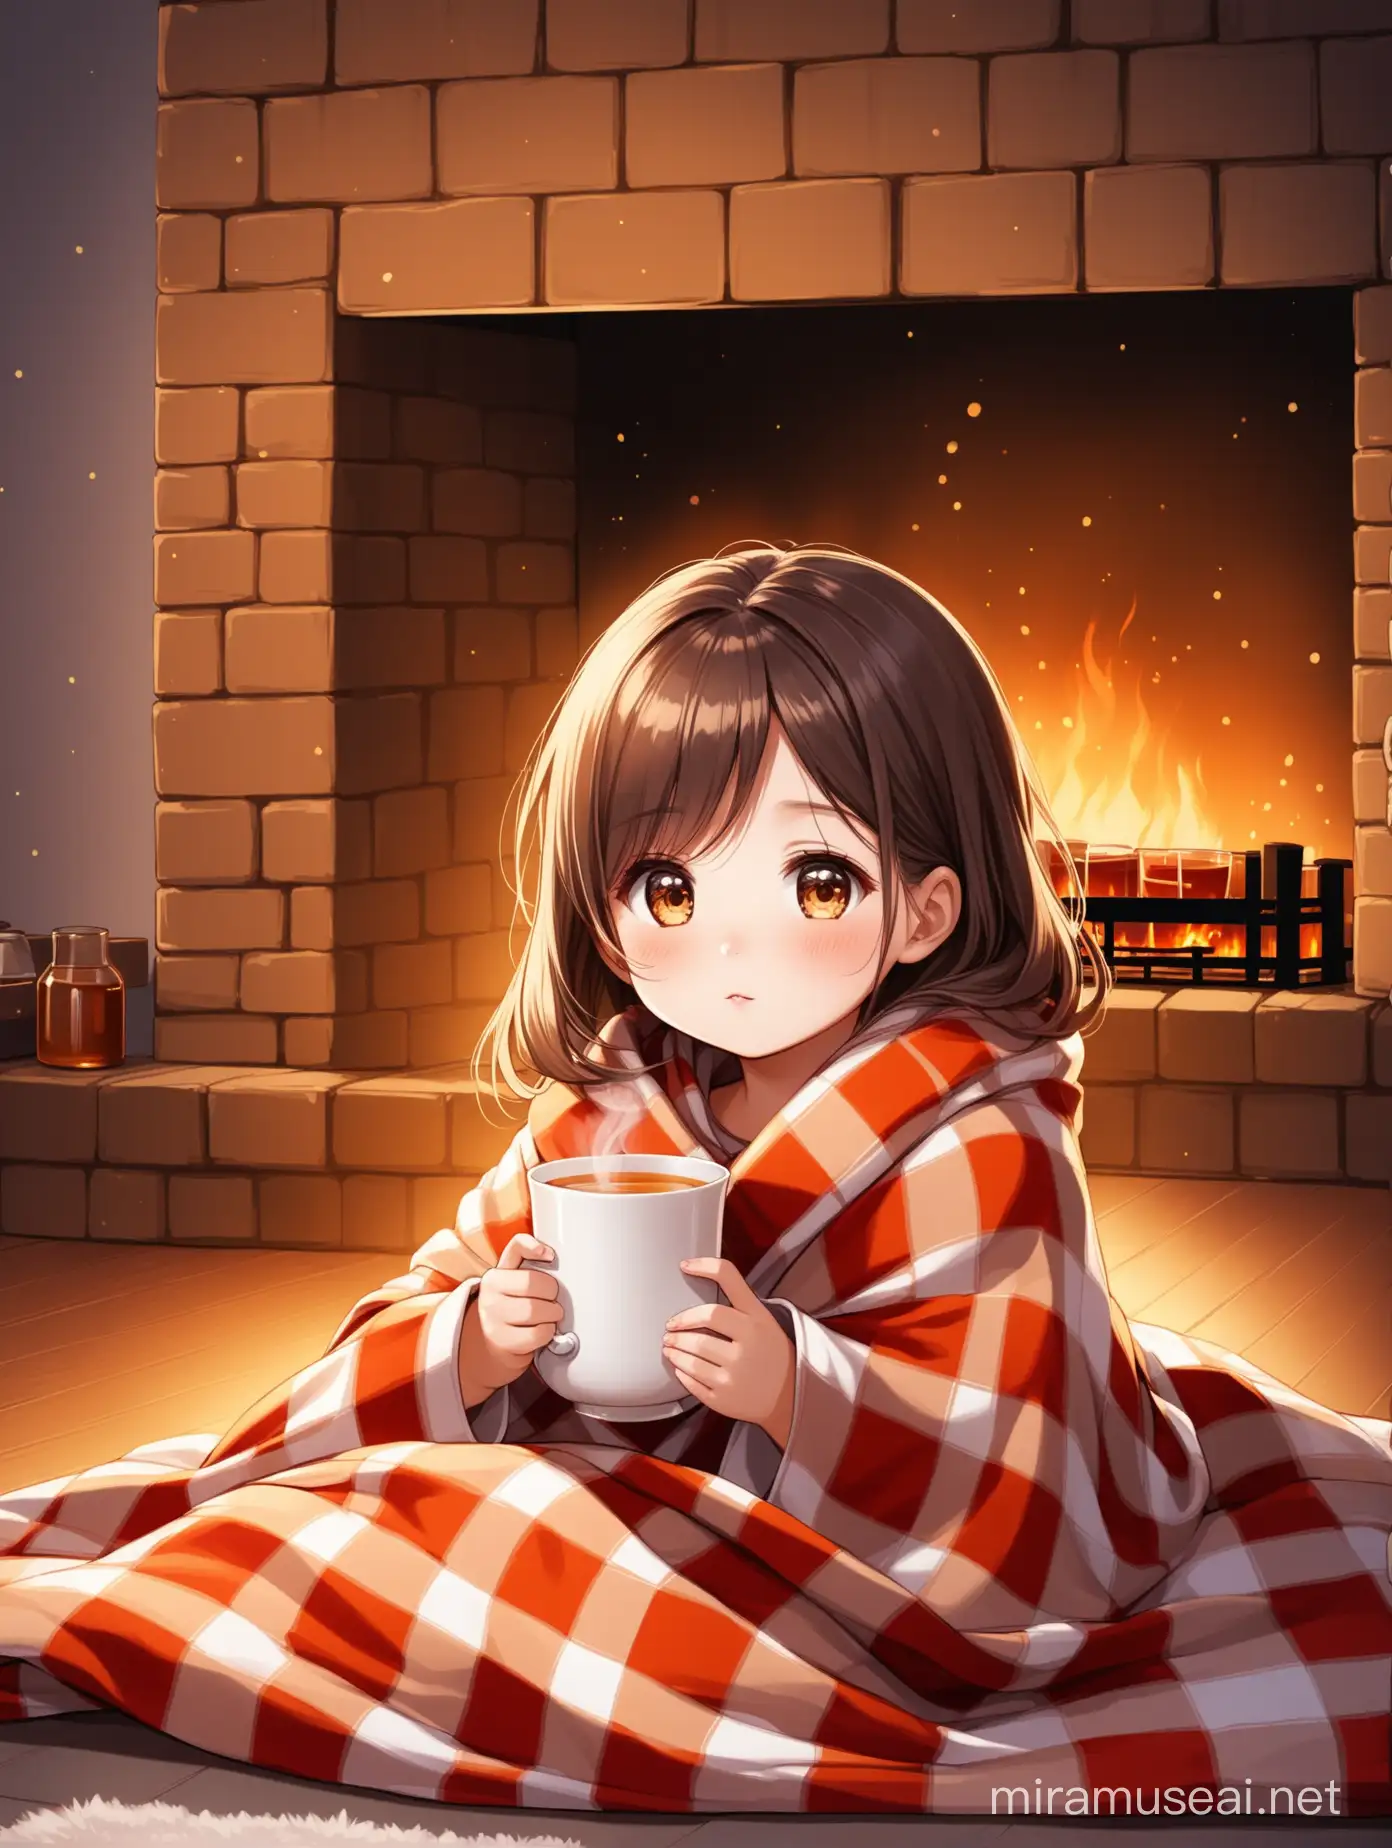 a little girl, wrapped in a checkered blanket, drinks hot tea and looks at the fireplace